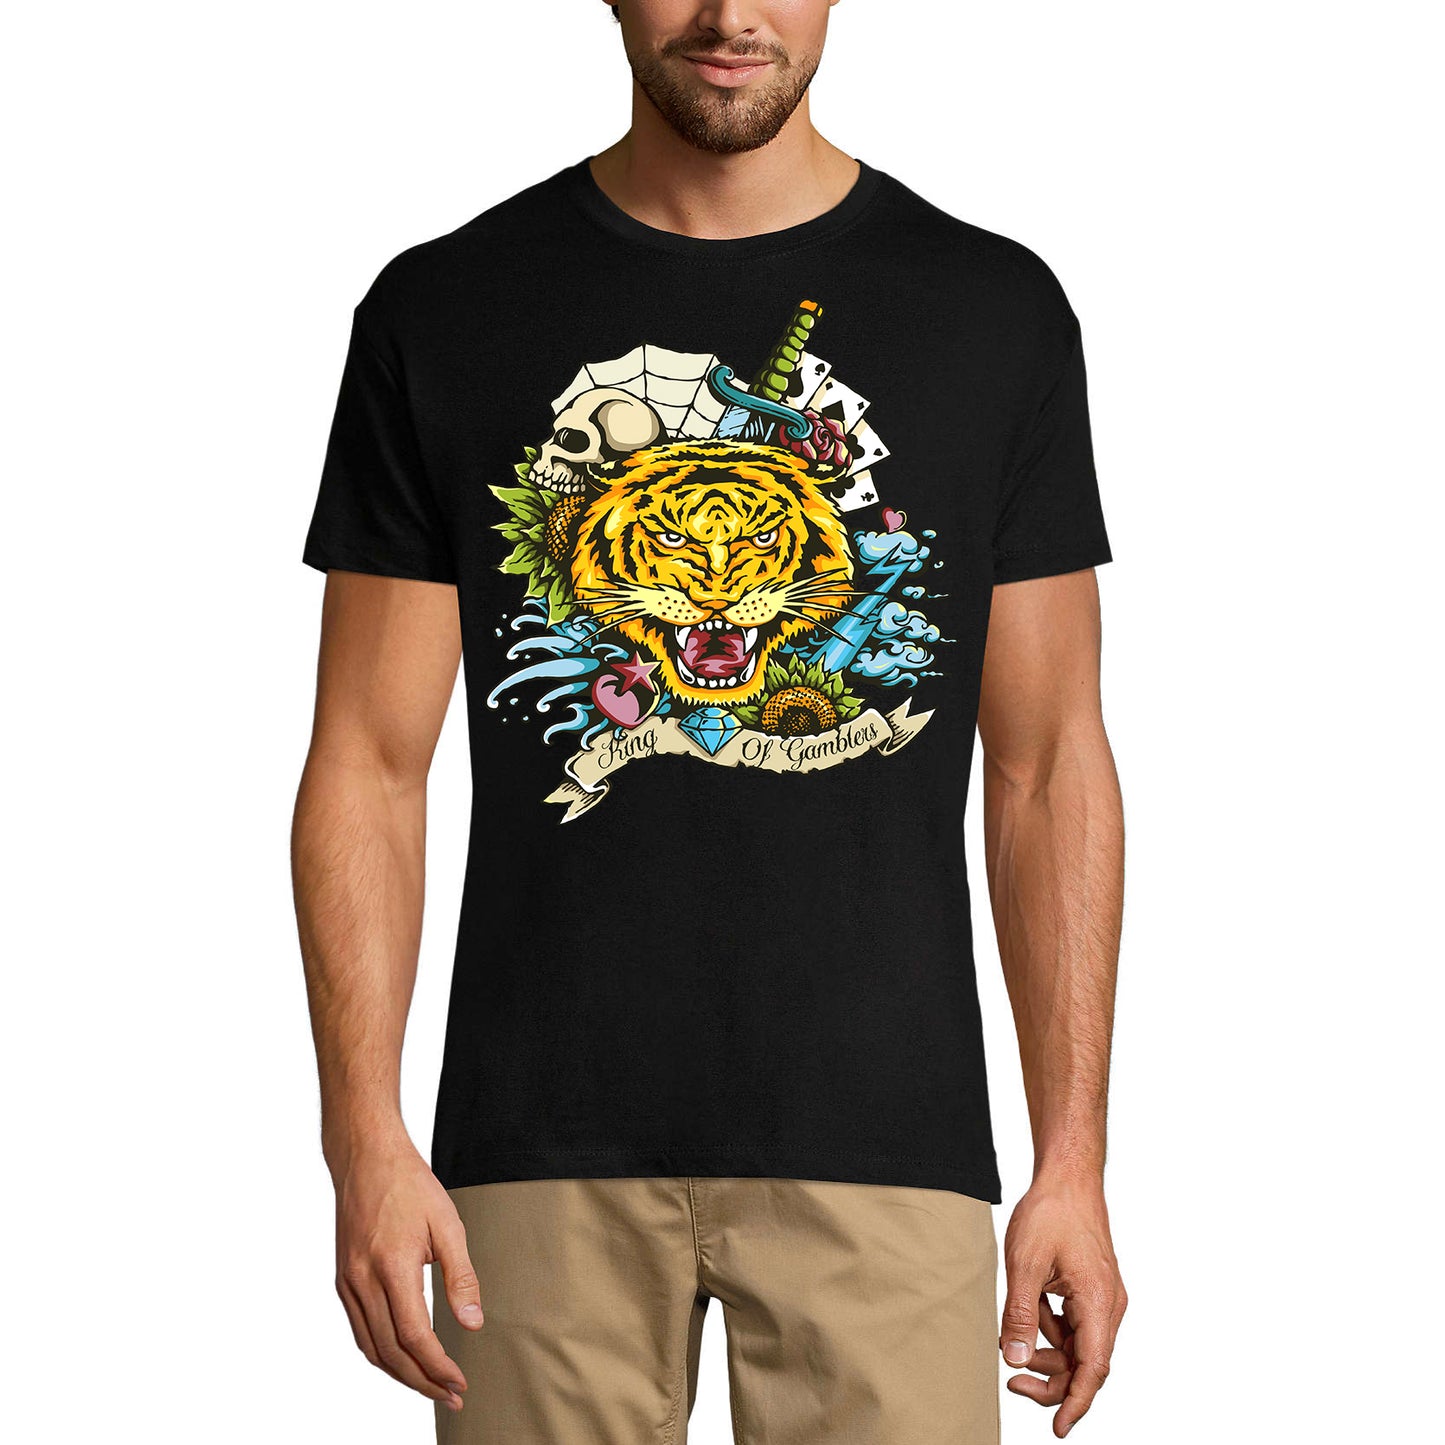 ULTRABASIC Graphic Men's T-Shirt King Of Gamblers - Scary Tiger Head